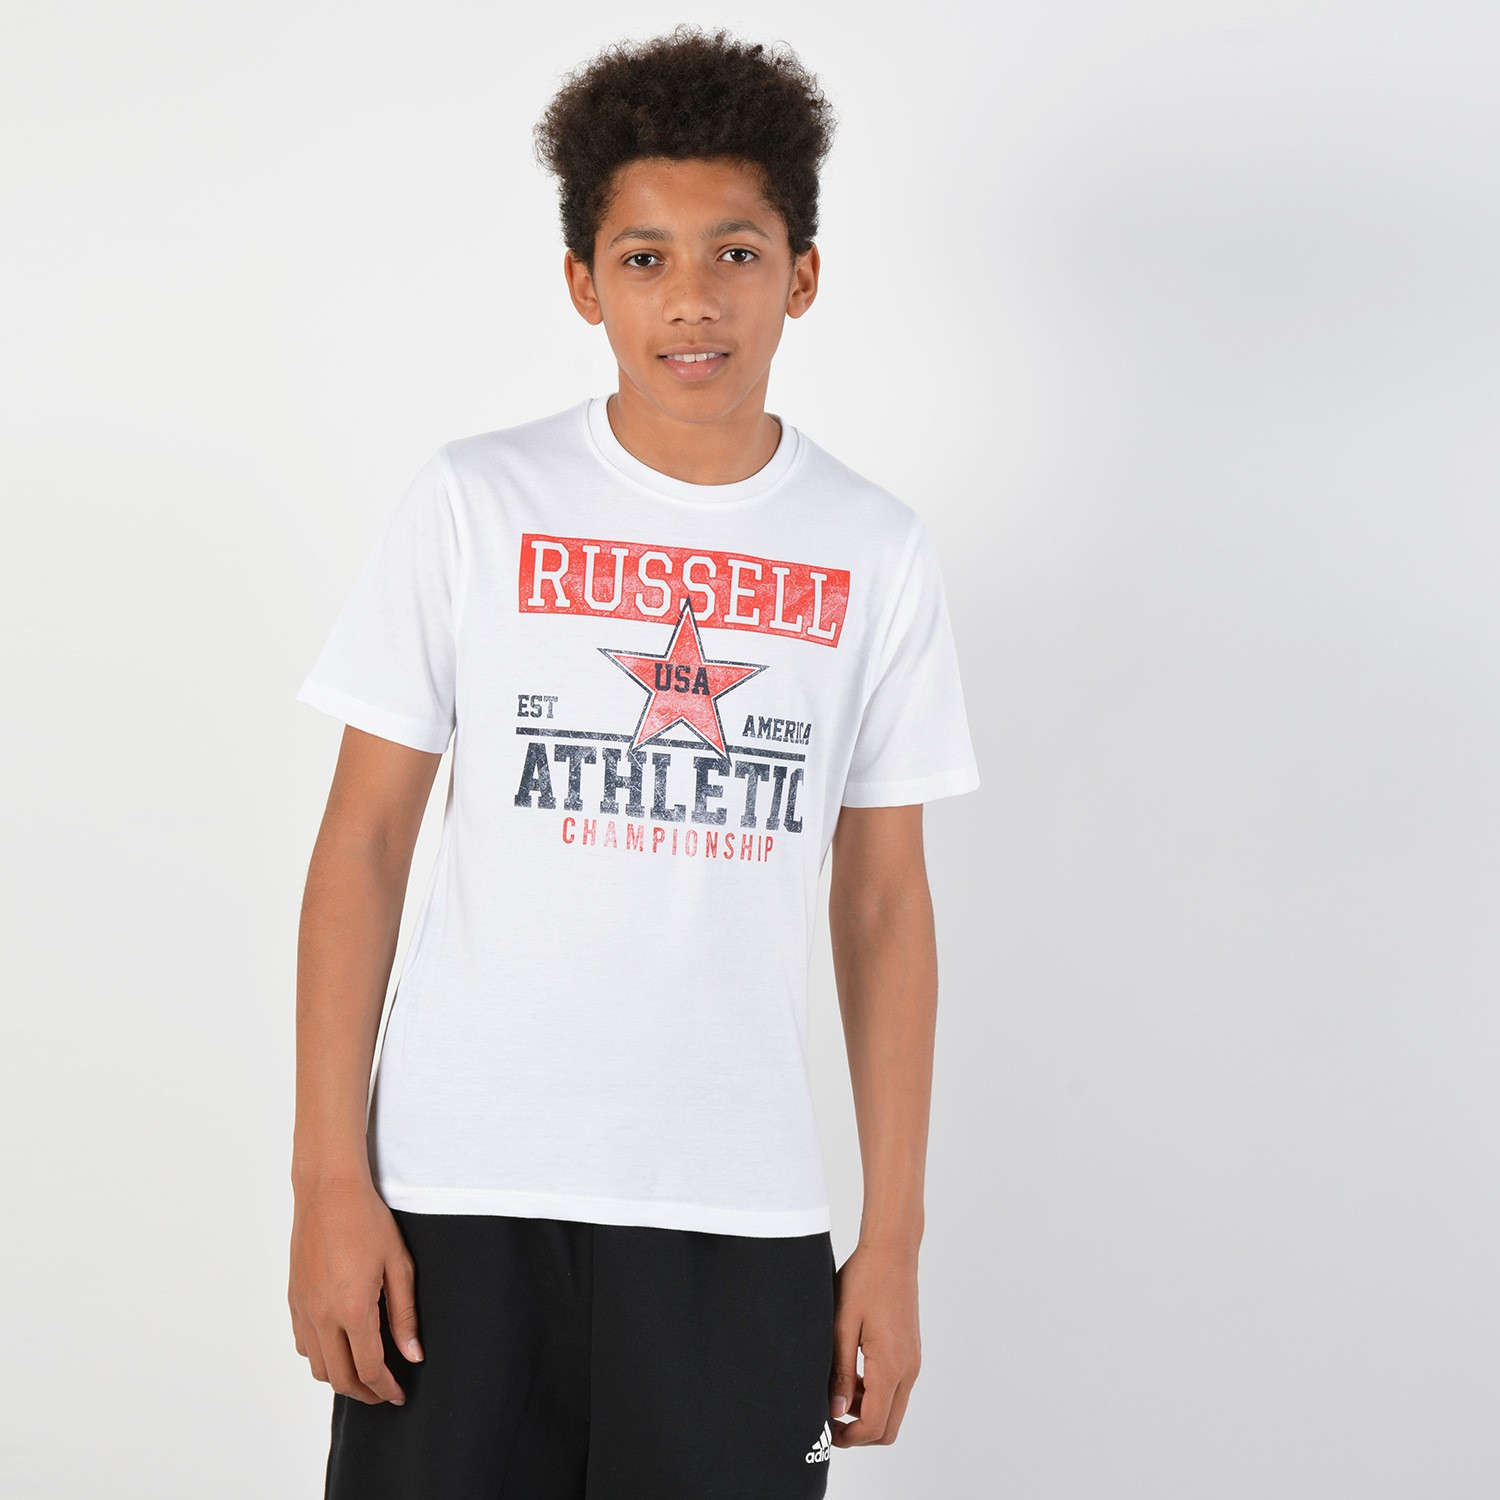 Russell Athletic Championship Παιδικό T-Shirt (9000028885_6804)